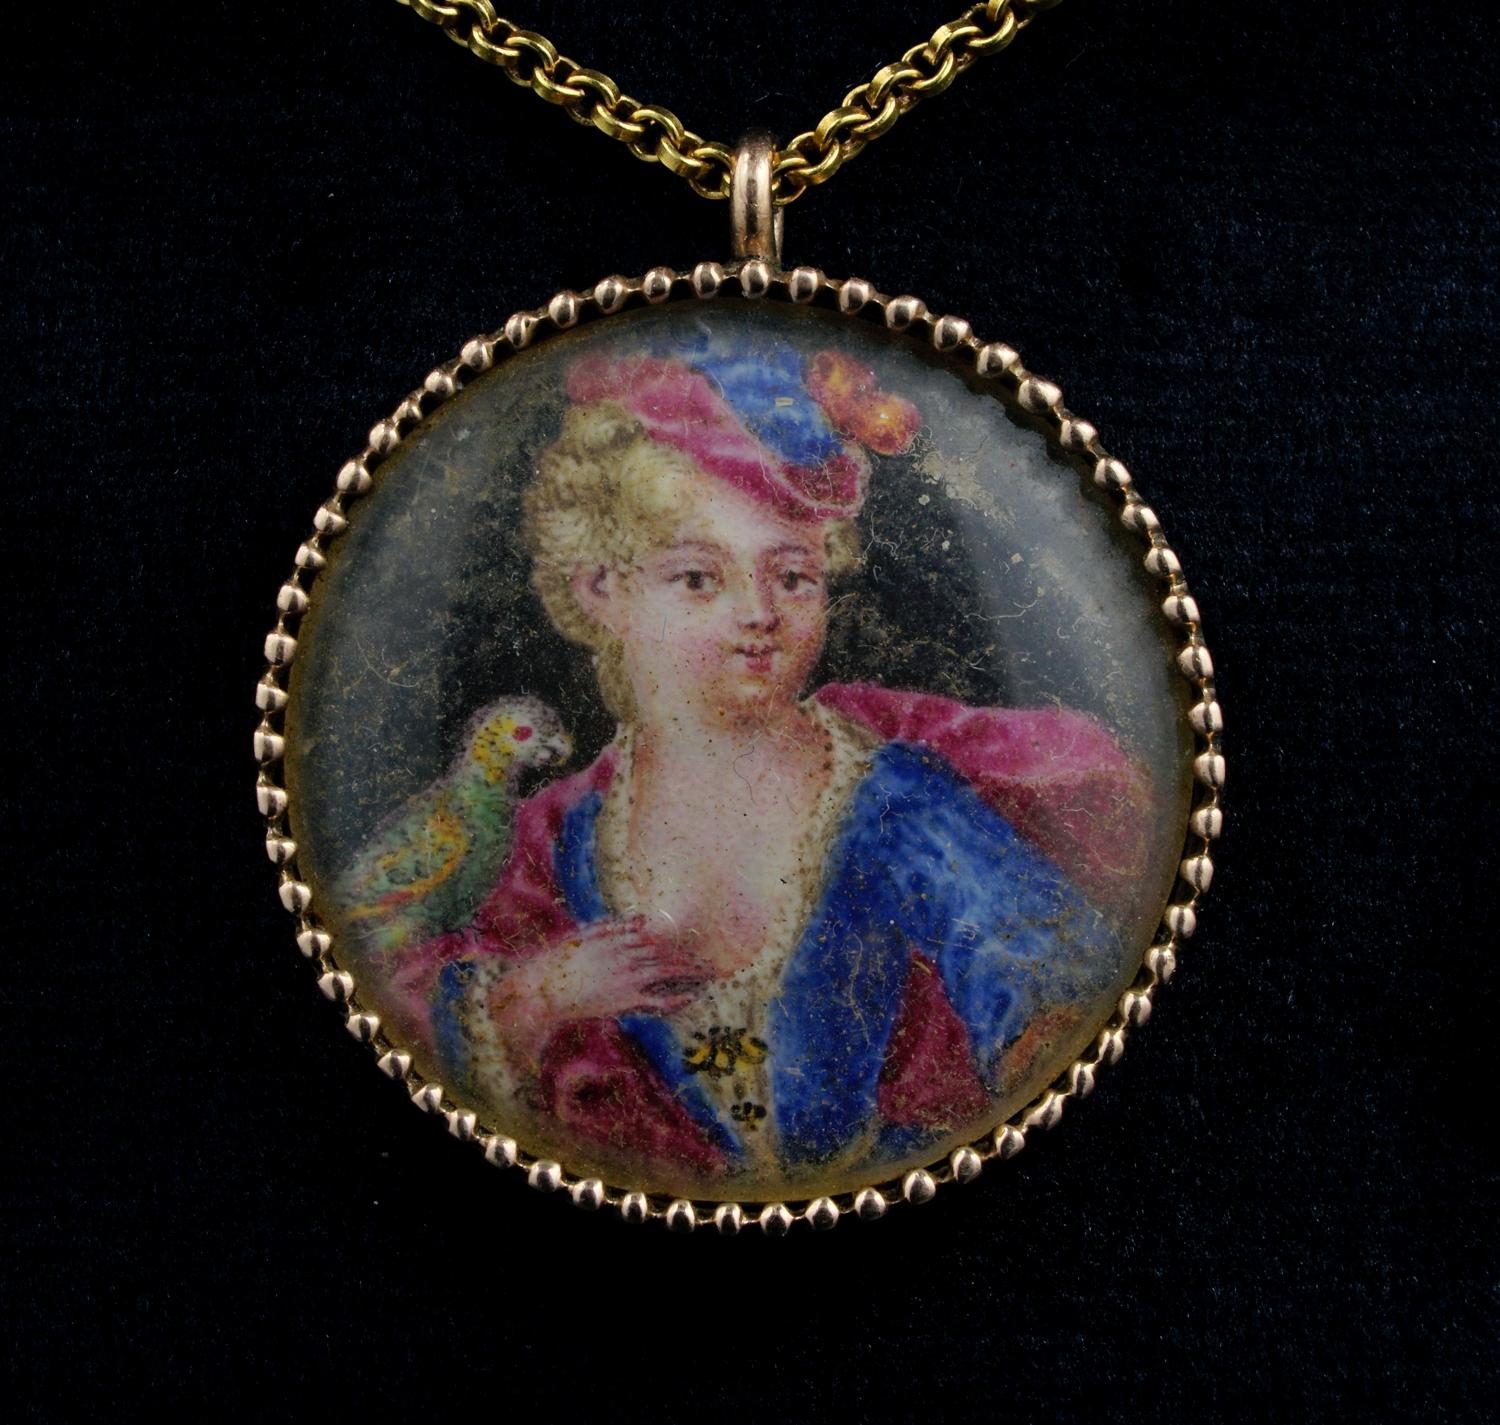 Pictured for the Eternity!

The portrait miniature was an art that flourished from the sixteenth to the mid-nineteenth century all over Europe
This rare early 18th century example hand painted on Vellum still kept under its original blow glass,